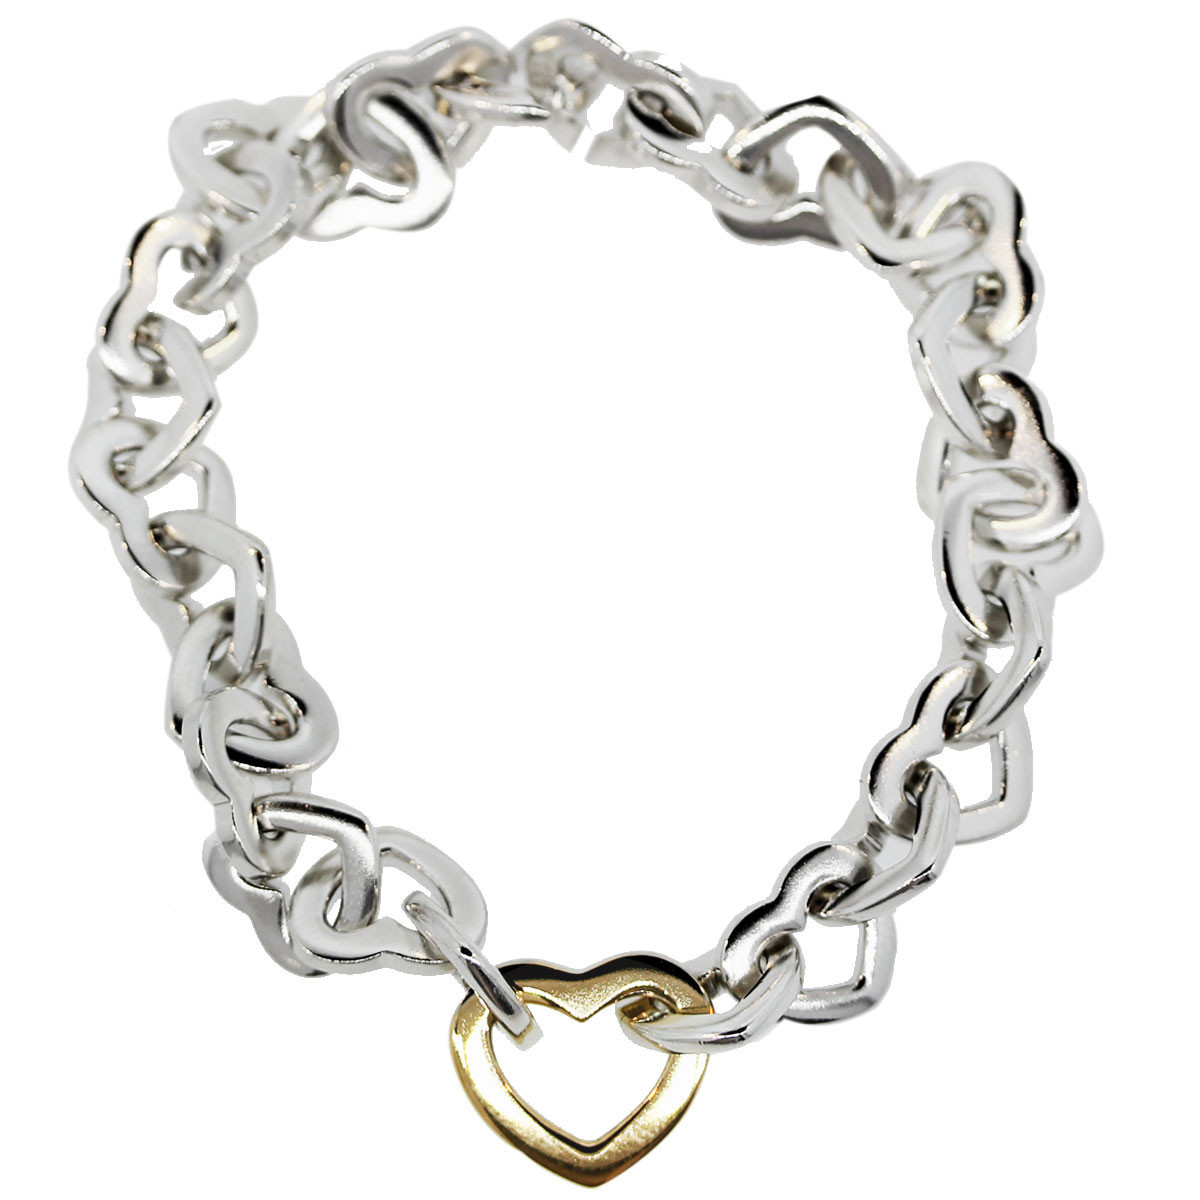 Tiffany And Co Heart Bracelet
 Tiffany and Co Sterling Silver and 18k Yellow Gold Heart